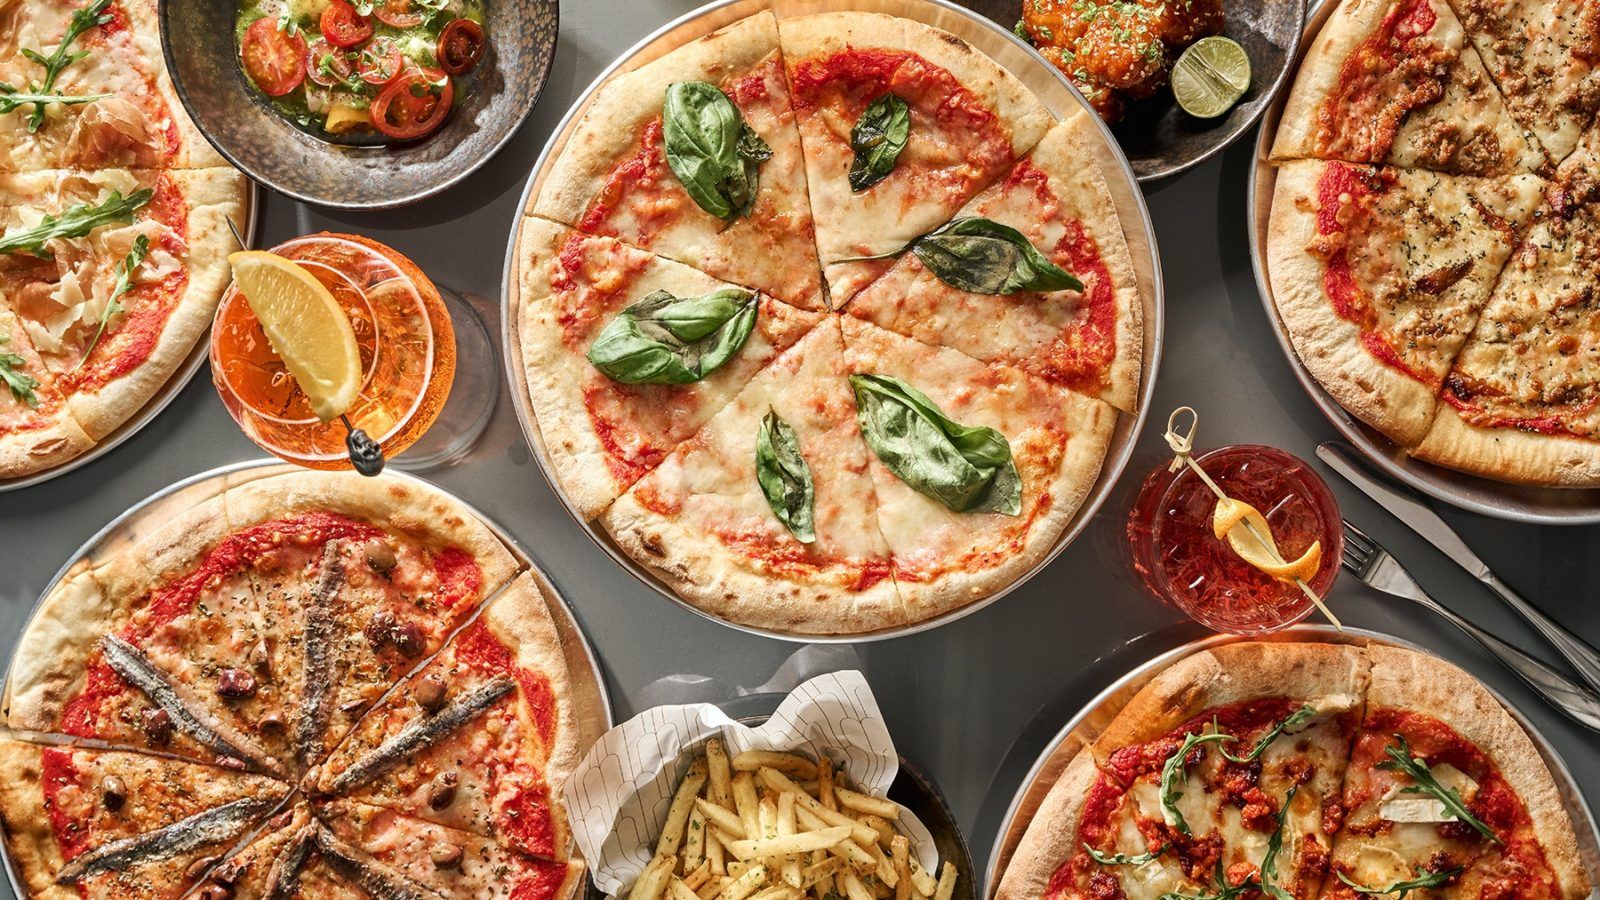 New Eats: Cotton Tree Pizzeria at The Murray, Preface Coffee & Wine’s 50/50 burger, takeaway menus and more